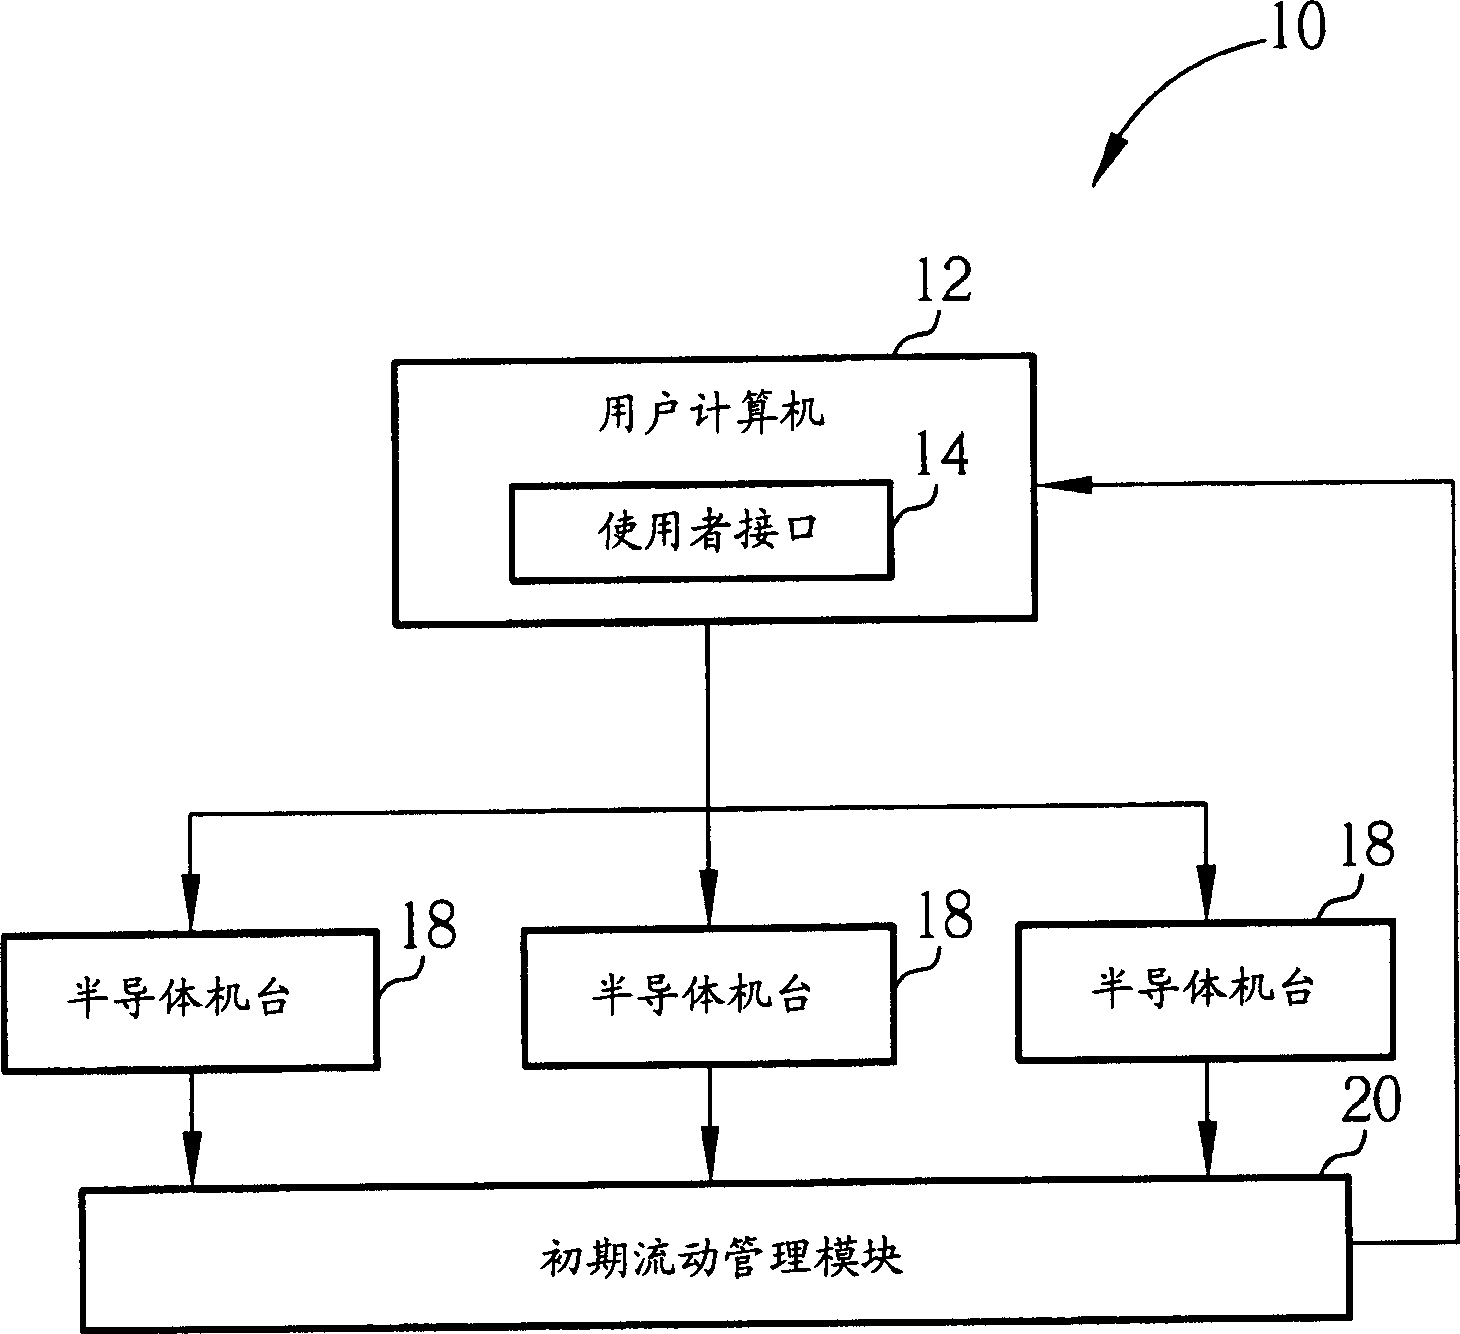 Method for early stage mobile management of semiconductor equipment and related system